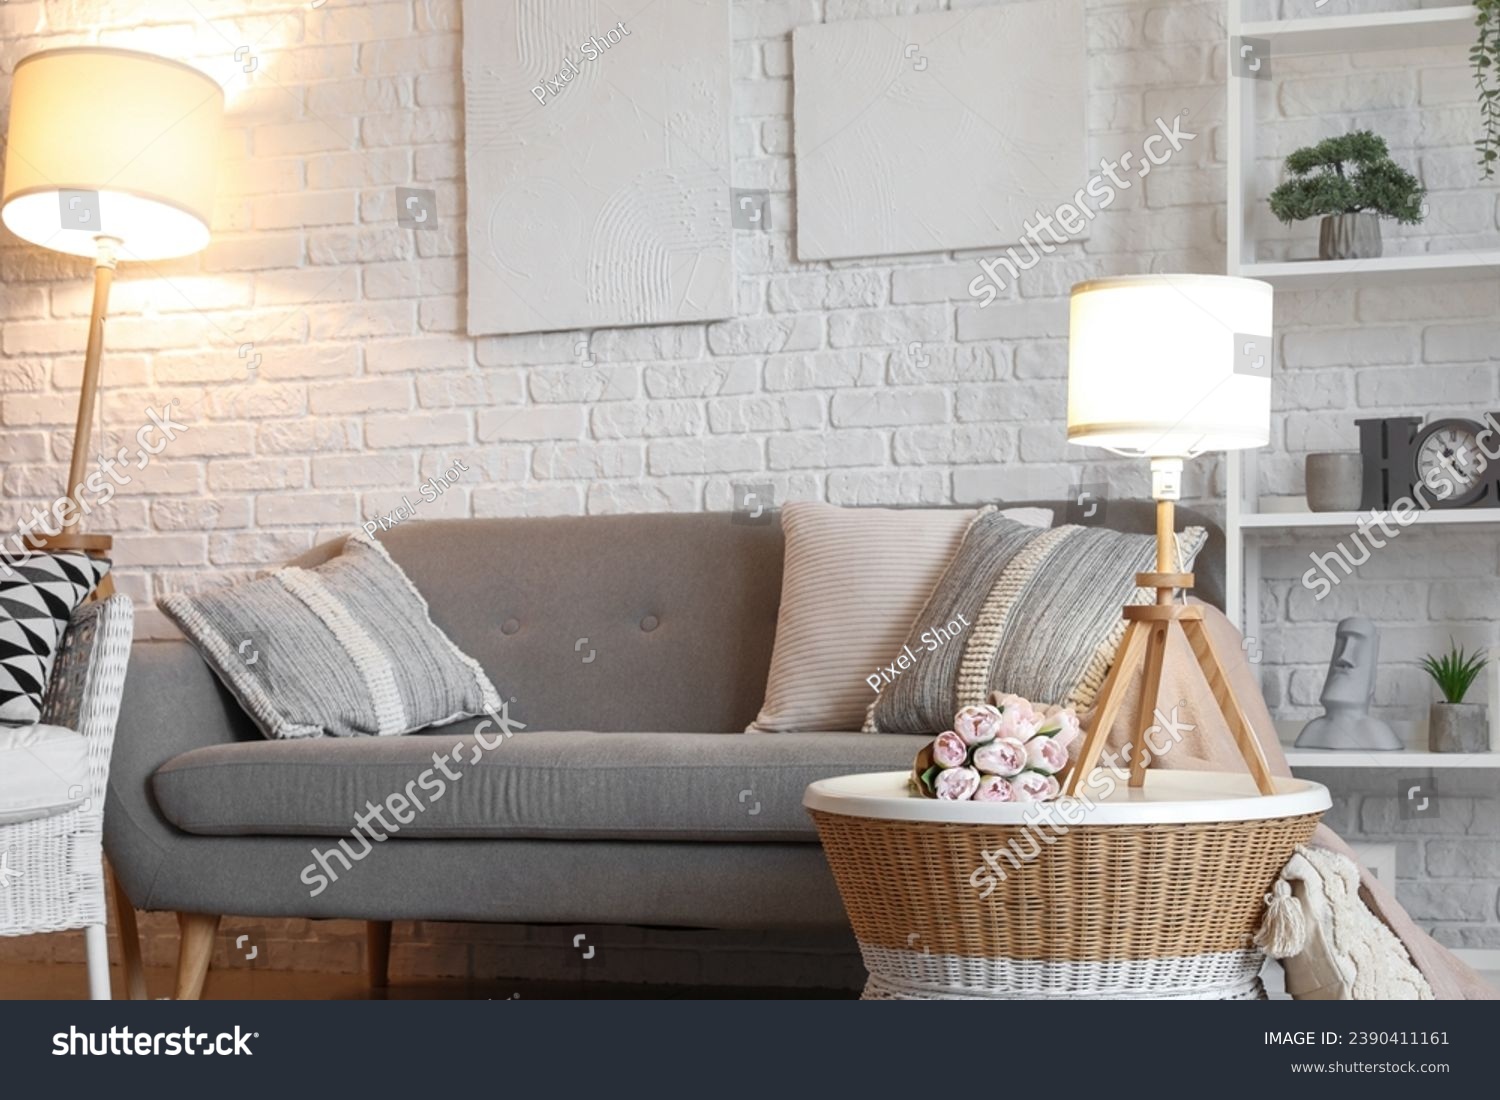 Interior of living room with cozy grey sofa and glowing lamps #2390411161